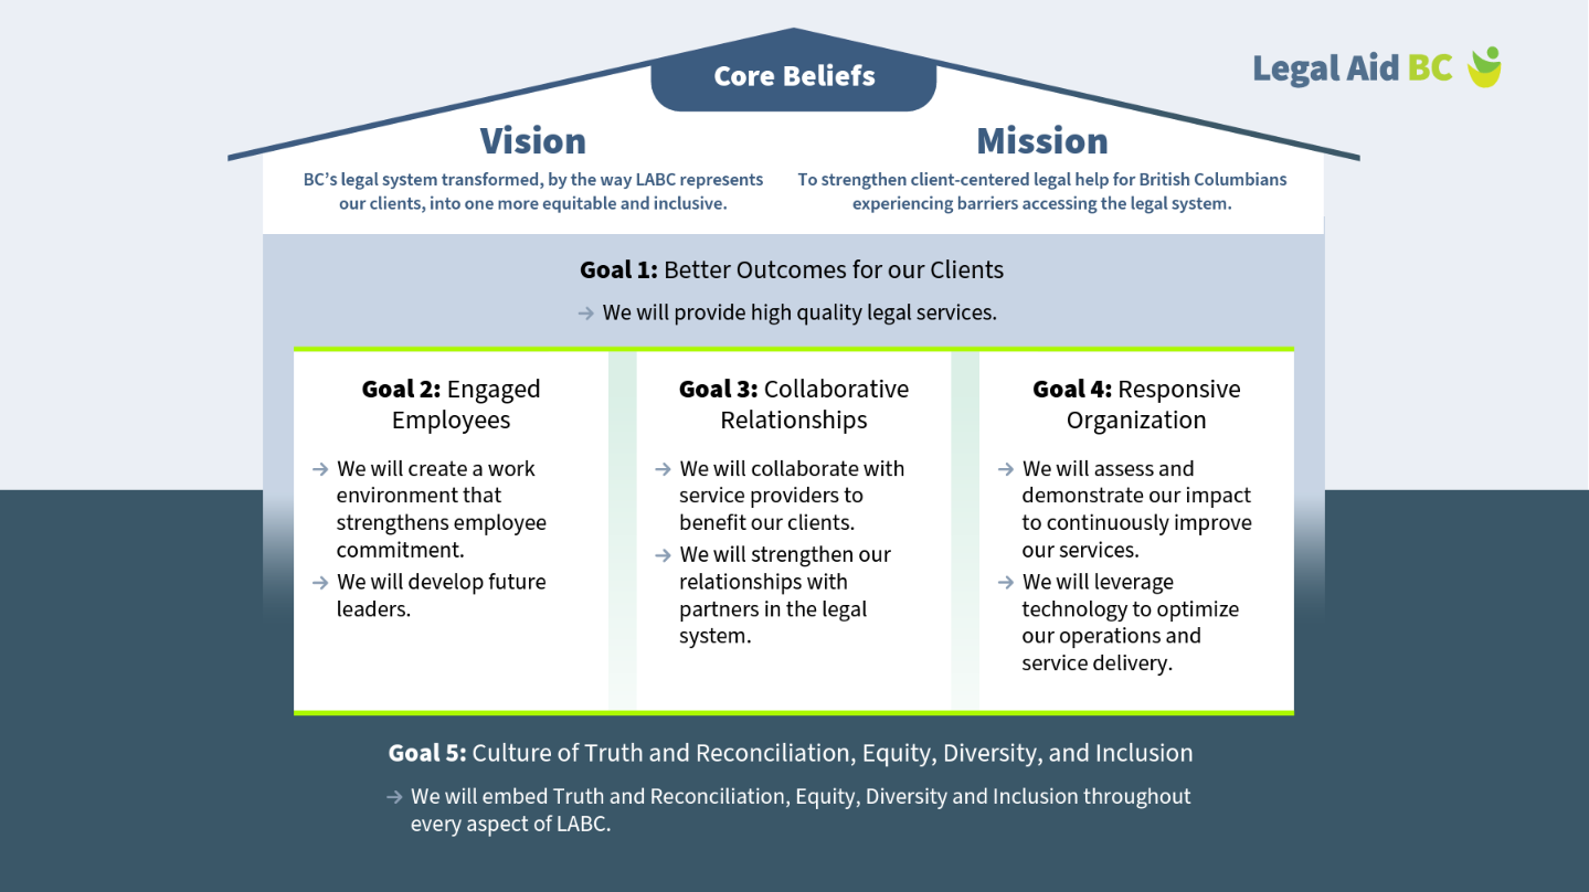 Legal Aid BC's core beliefs diagrammed as a house, with the goals supporting the vision and mission, making up the core beliefs